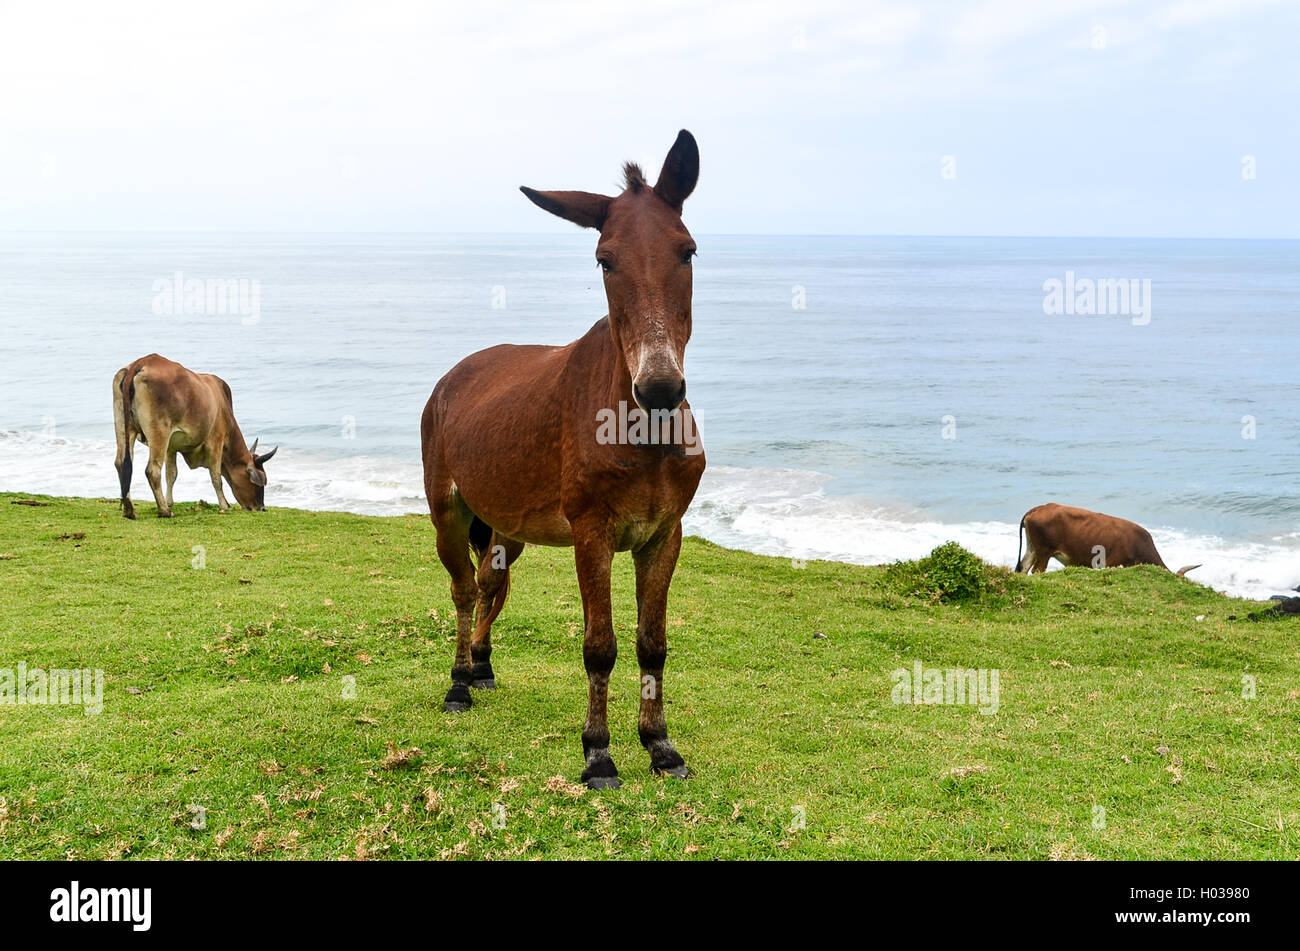 Landscape of Eastern Cape near Coffee Bay, South Africa Stock Photo